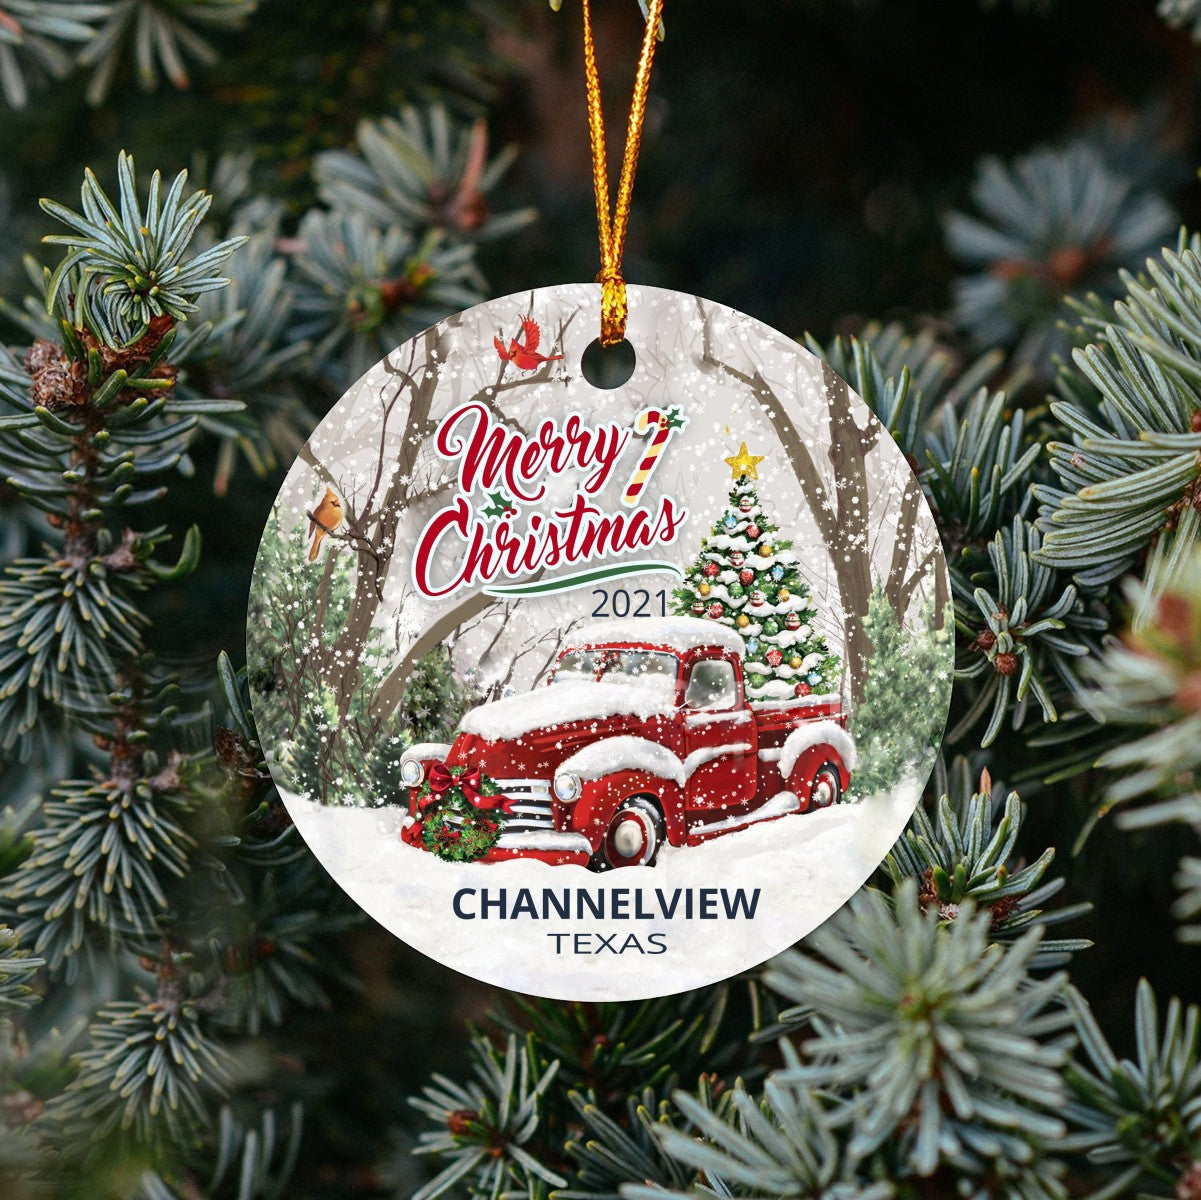 Christmas Tree Ornaments Channelview - Ornament With Name City, State Channelview Texas TX Ornament - Red Truck Xmas Ornaments 3'' Plastic Gift For Family, Friend And Housewarming